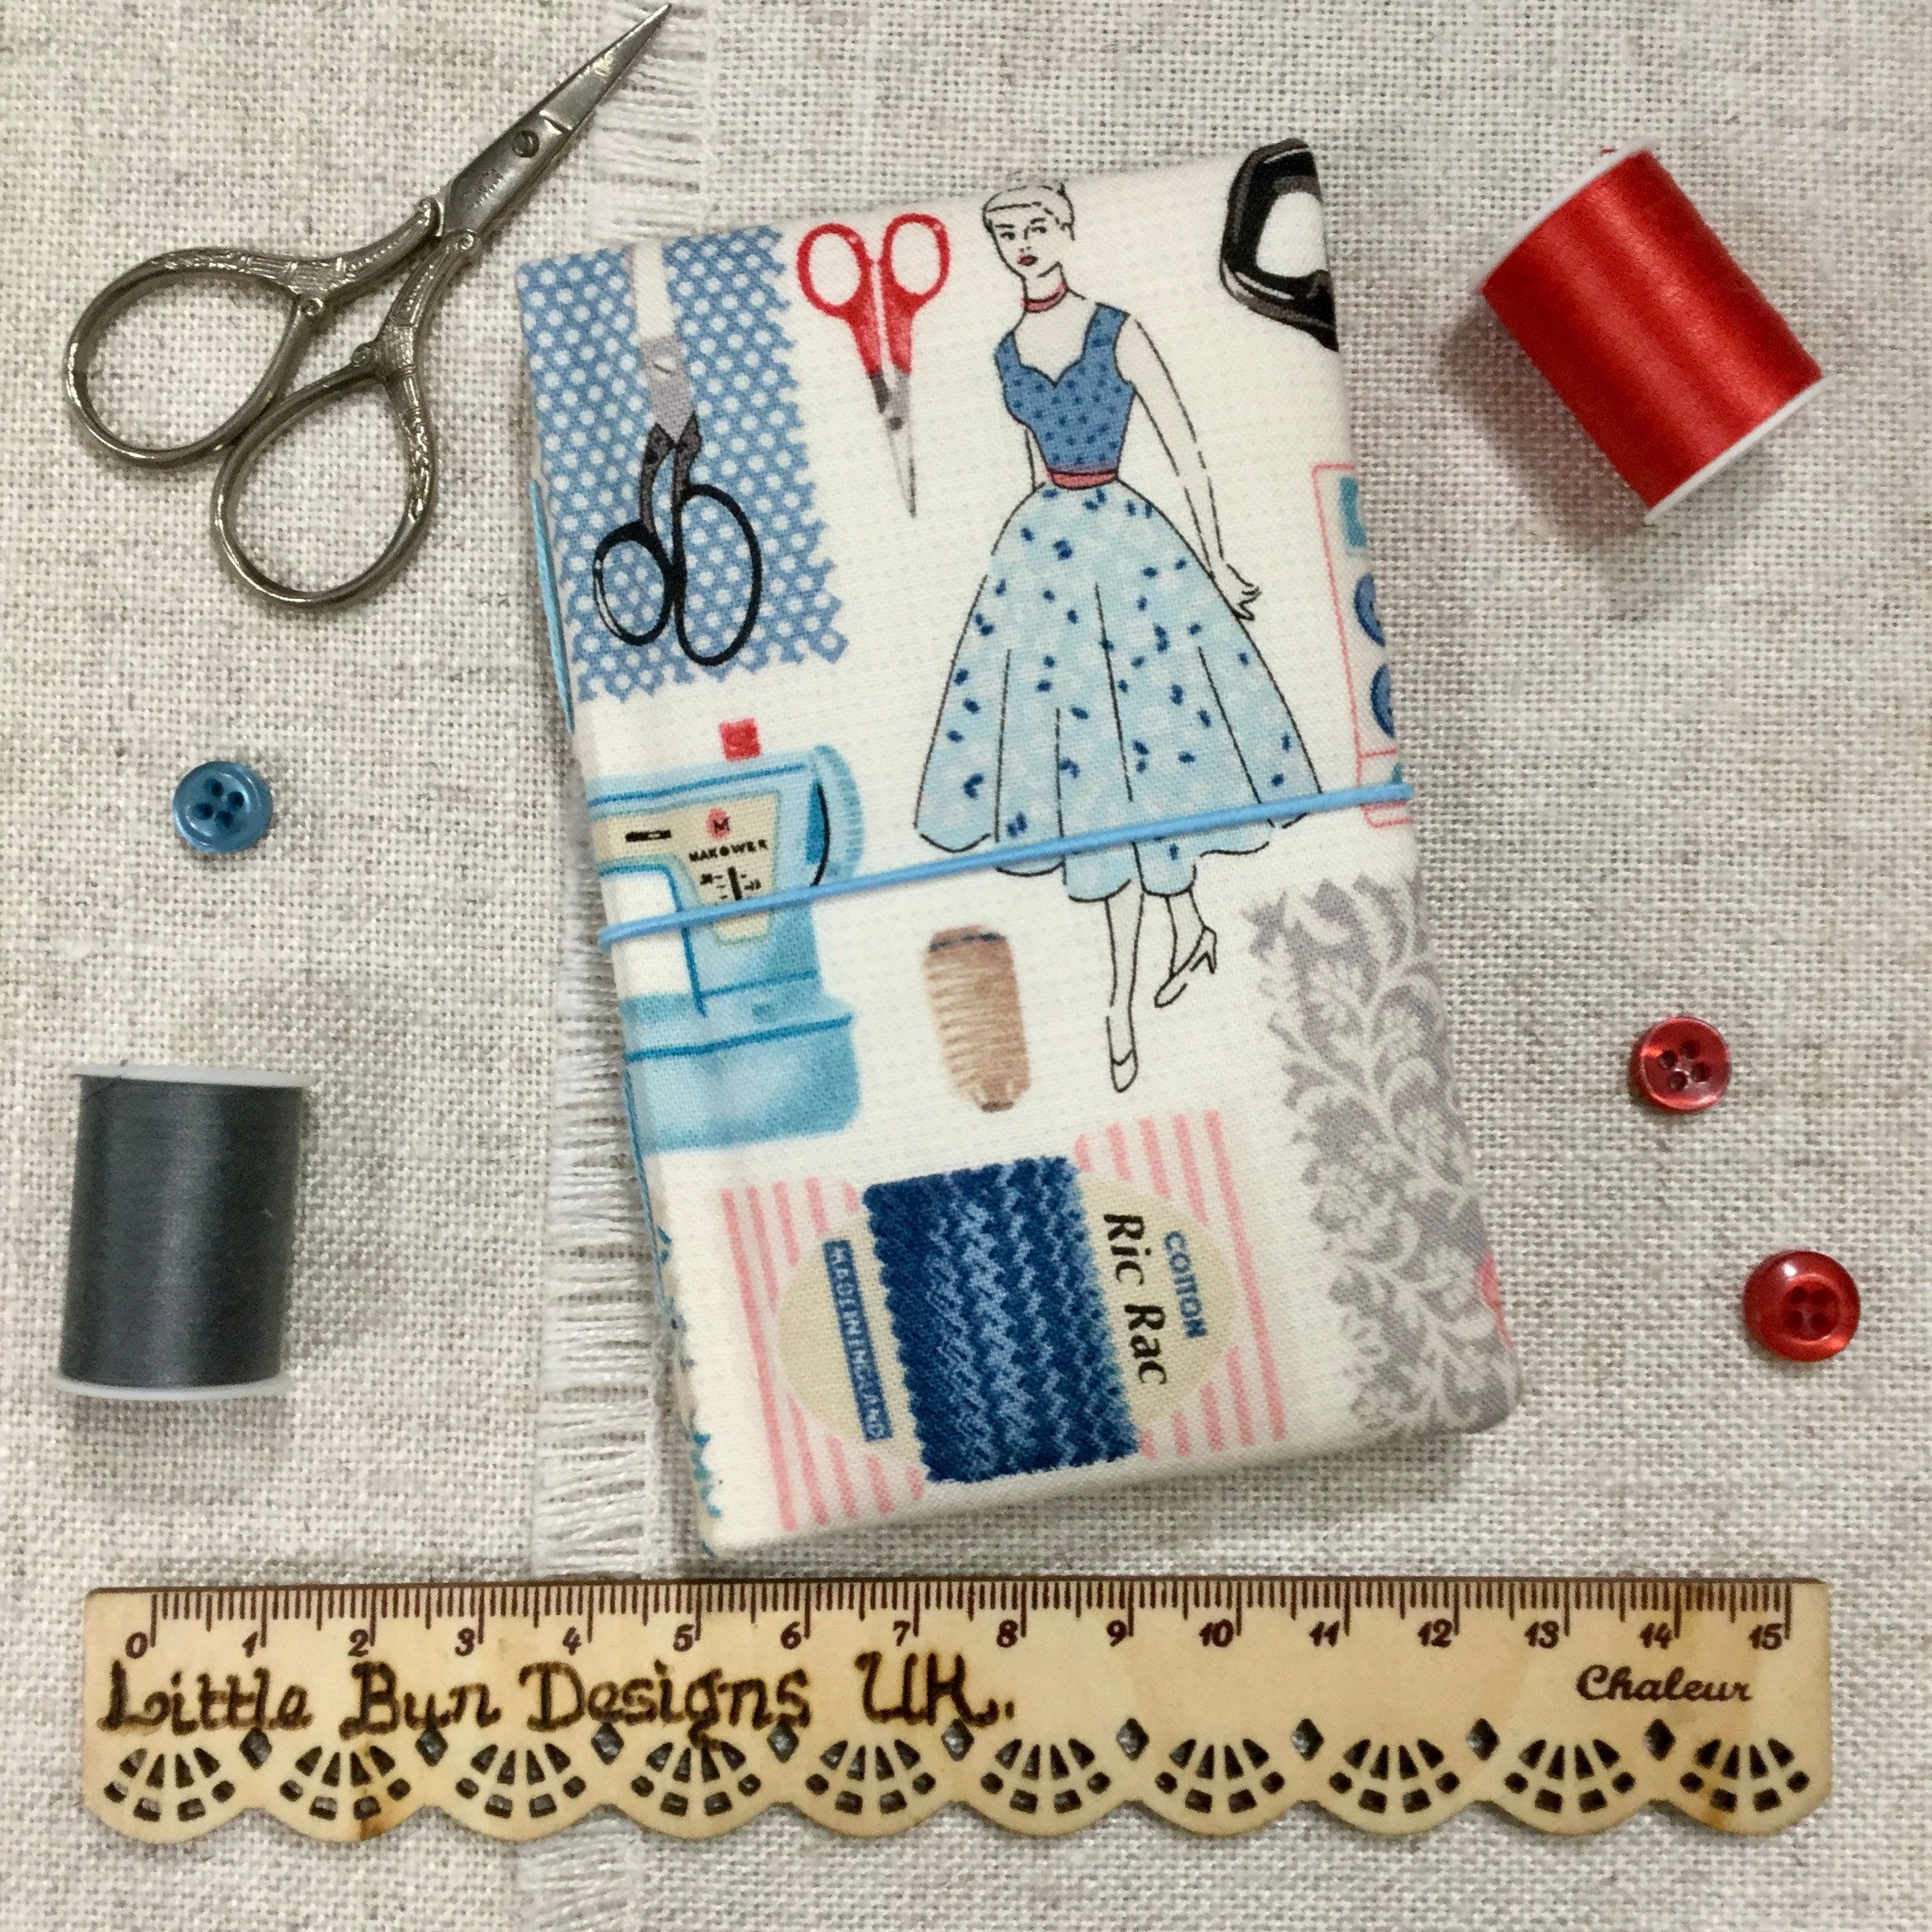 Handmade Needle Book Sewing Accessories Embroidery Needles